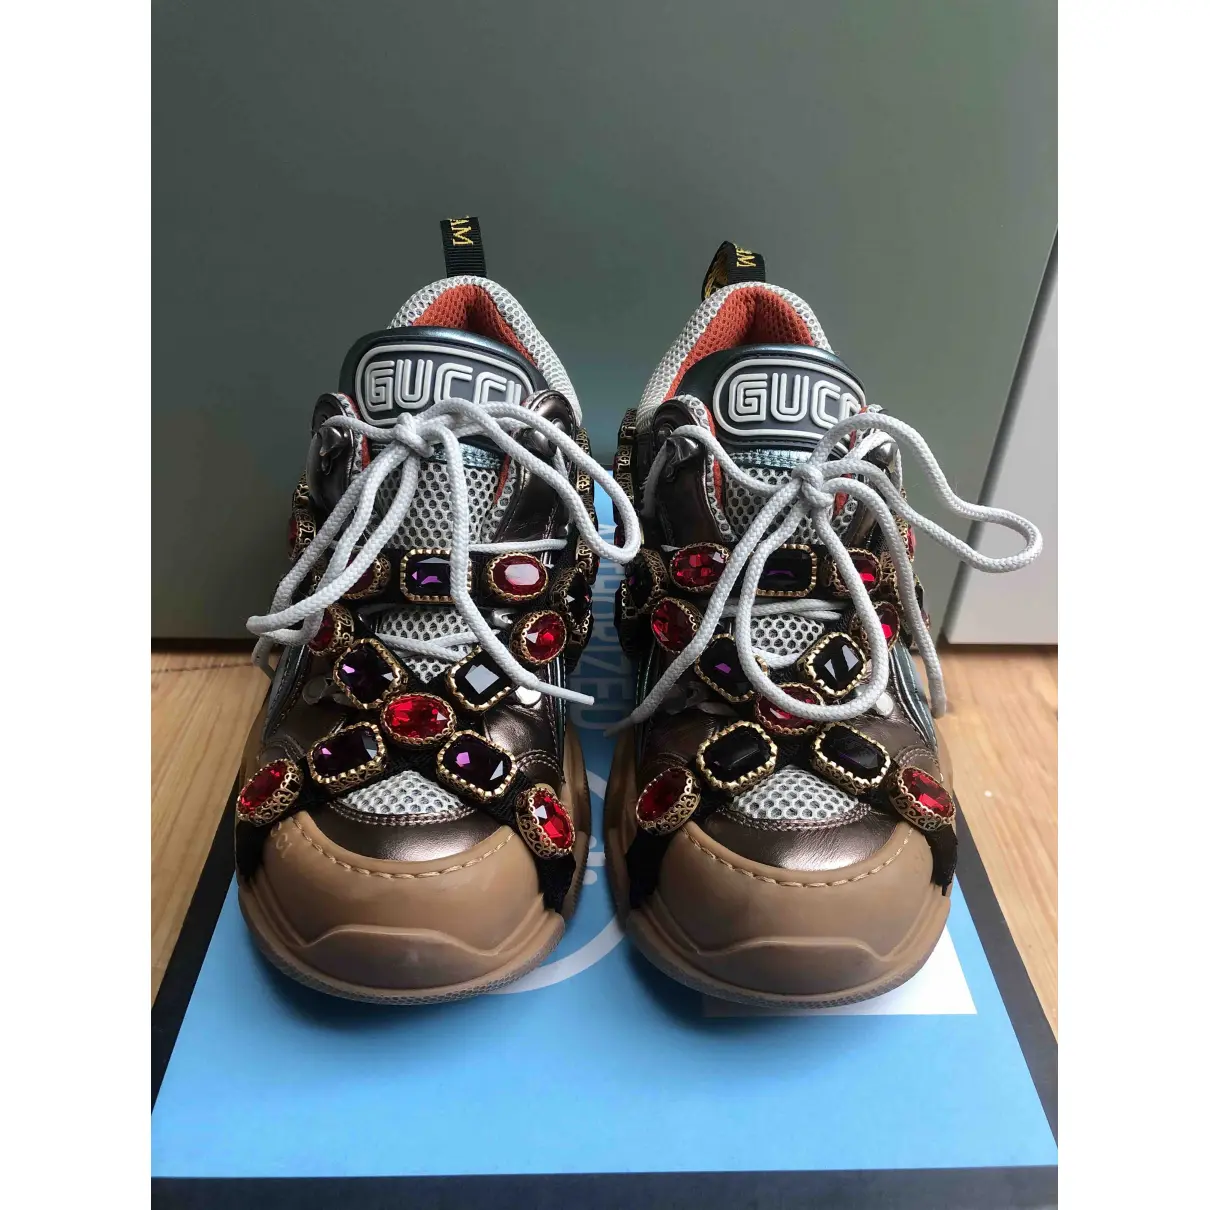 Buy Gucci Flashtrek leather trainers online